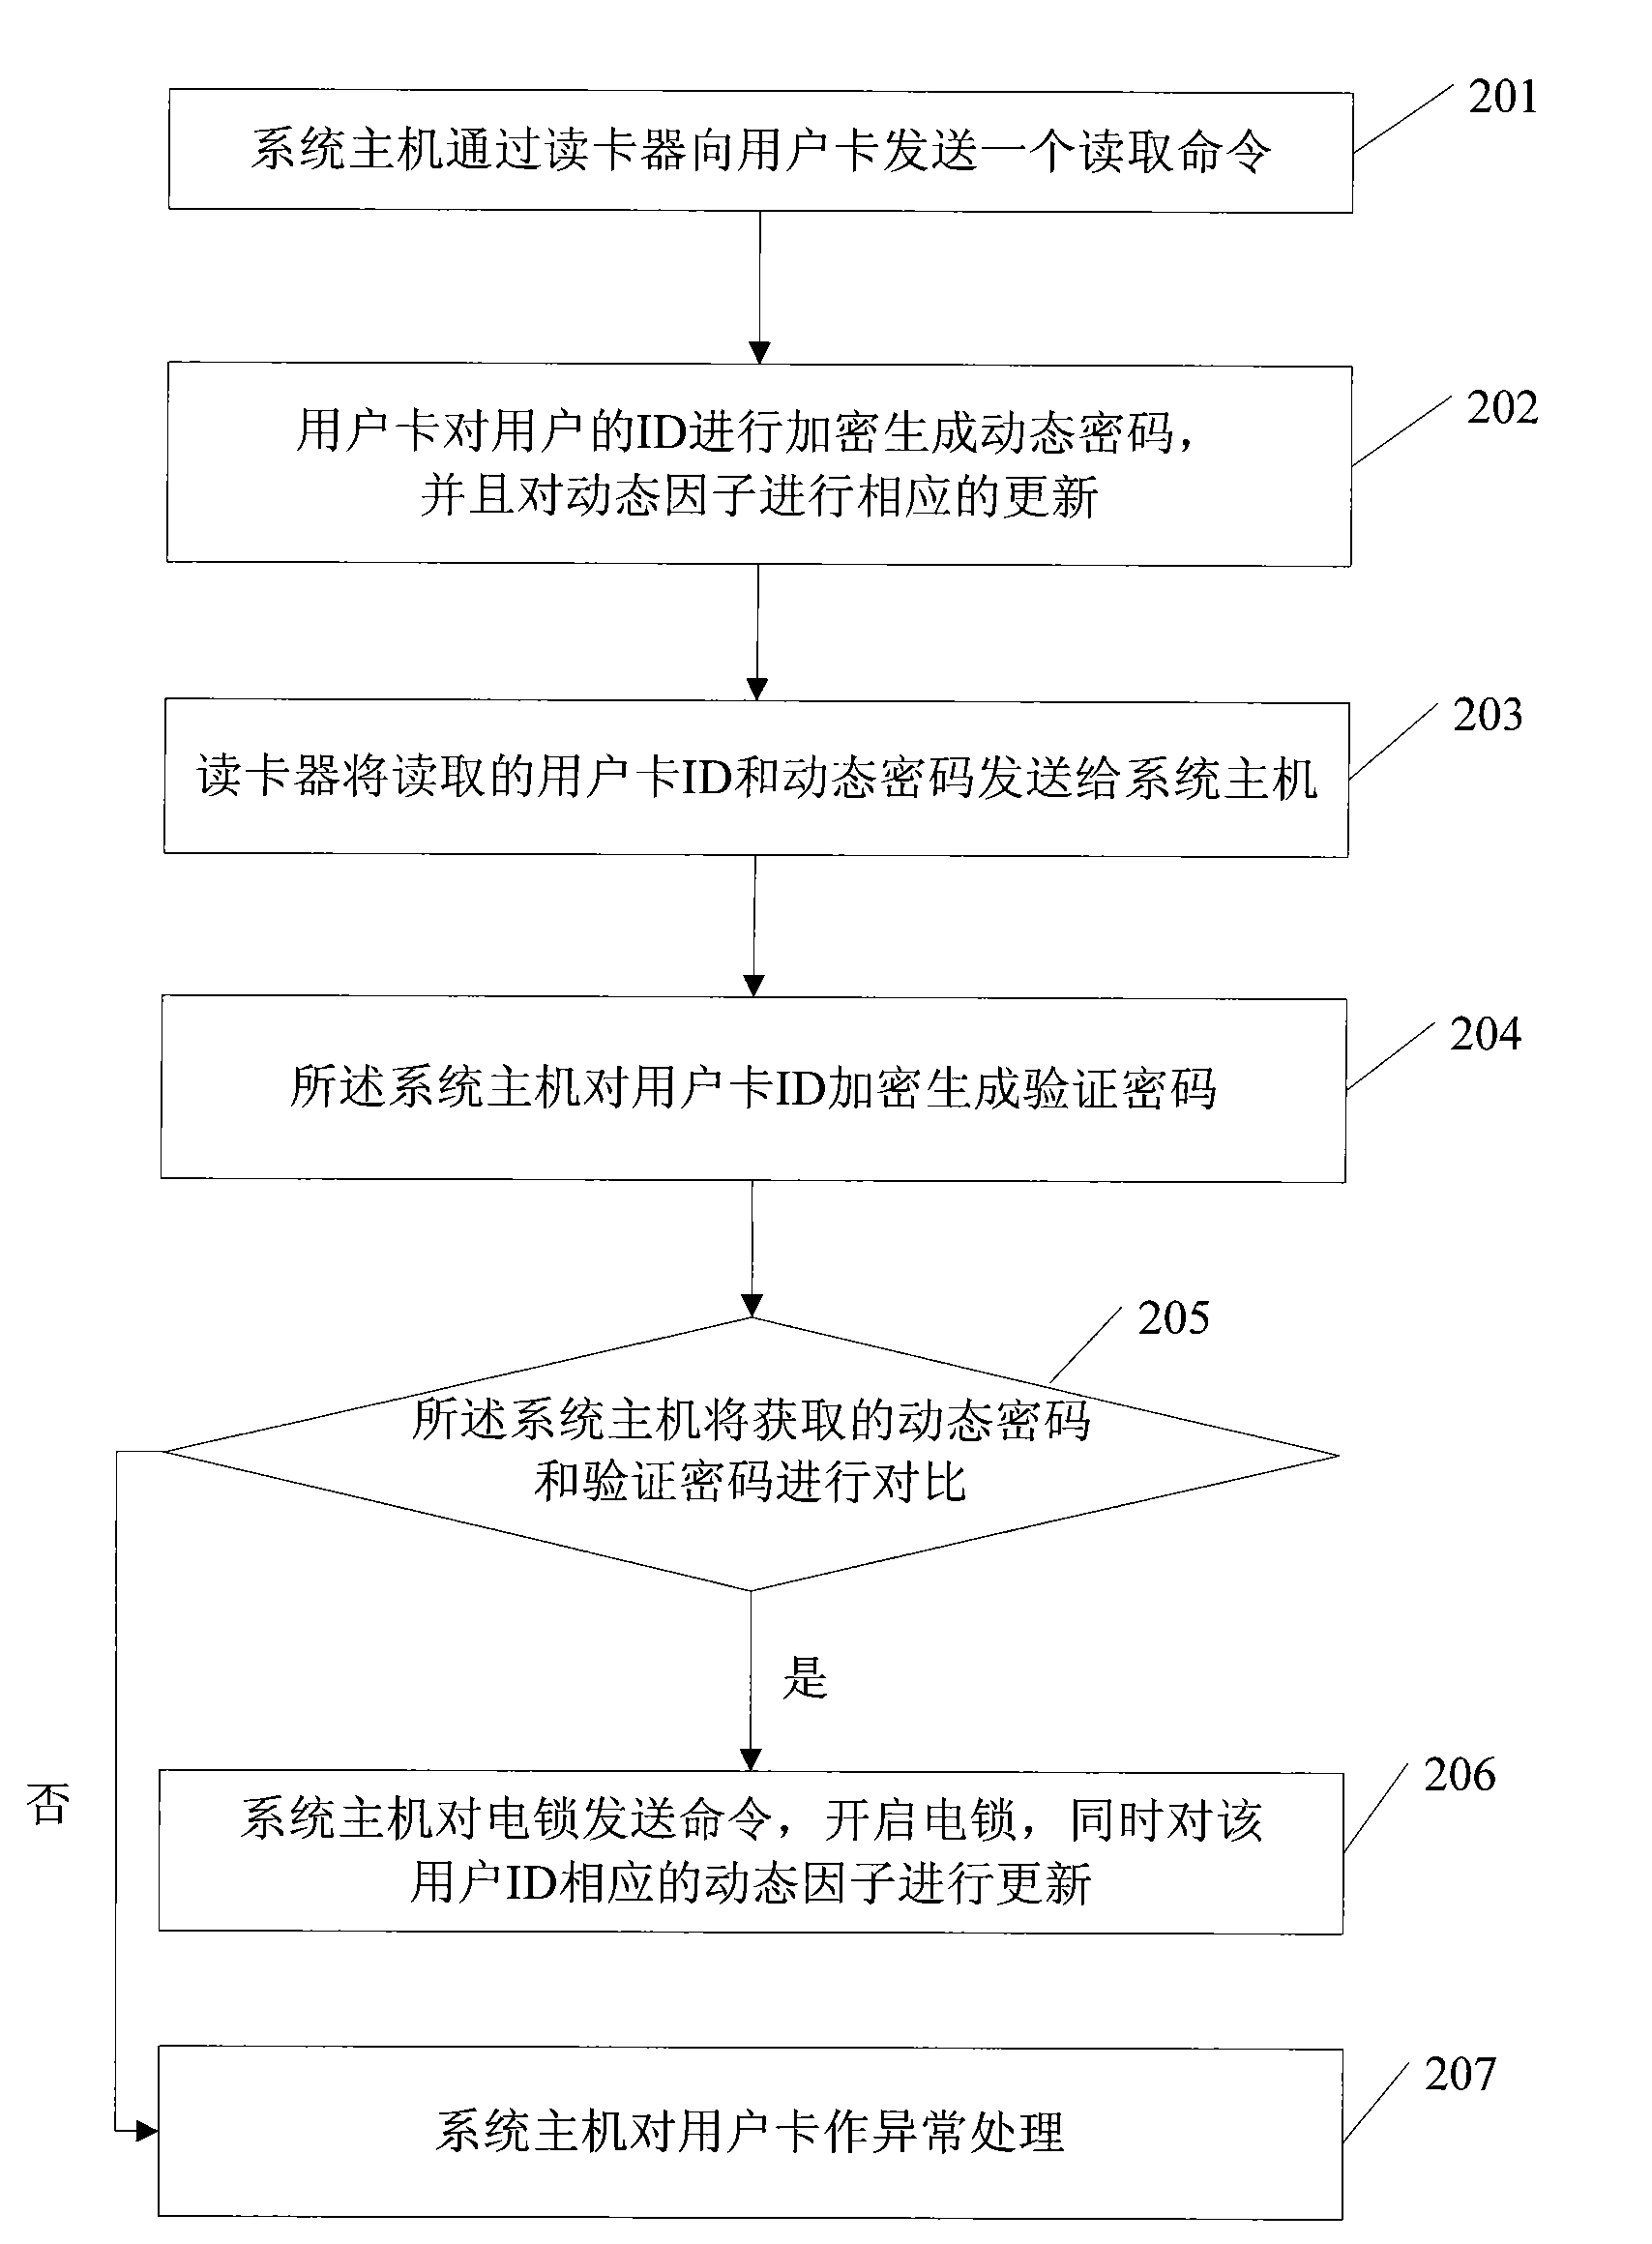 Access control system generated and verified on the basis of dynamic password and authentication method thereof